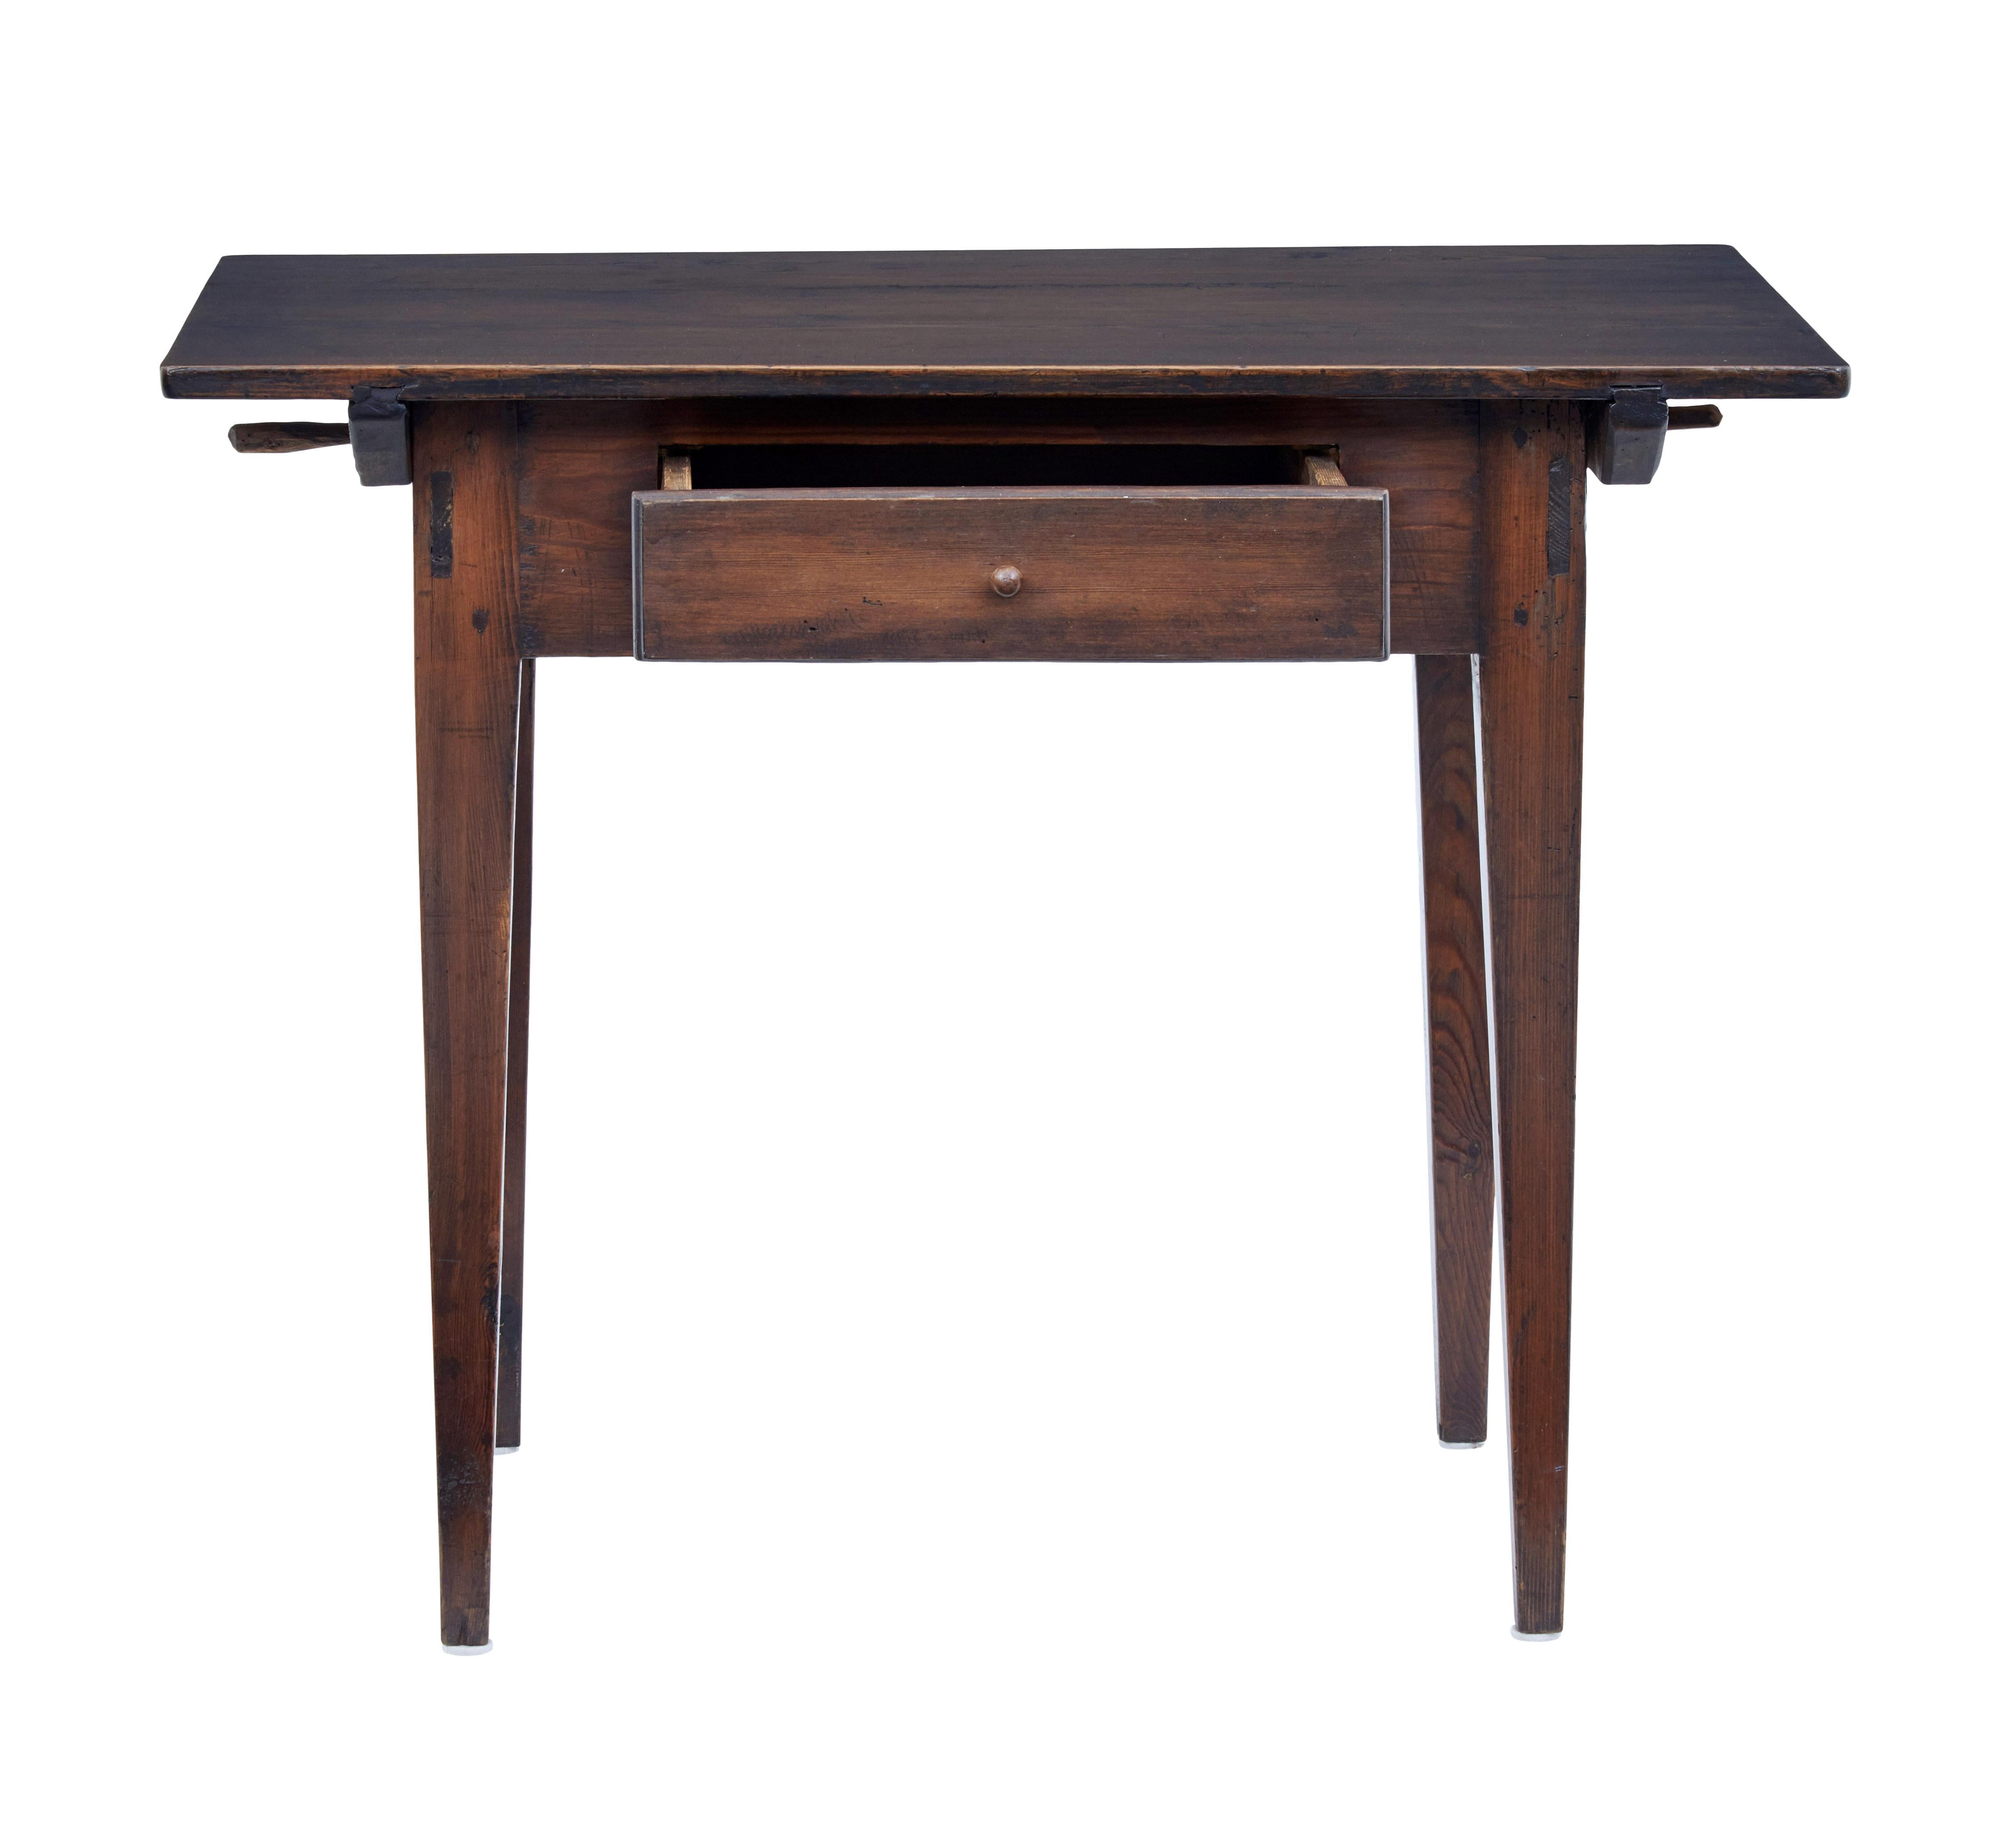 Rustic Swedish pine side table, circa 1880.

Dark stained pine table which has multiple uses such as an occasional desk or hall table. Top surface held in place by pegs. Single drawer to the front, standing on tapered legs.

Expected surface